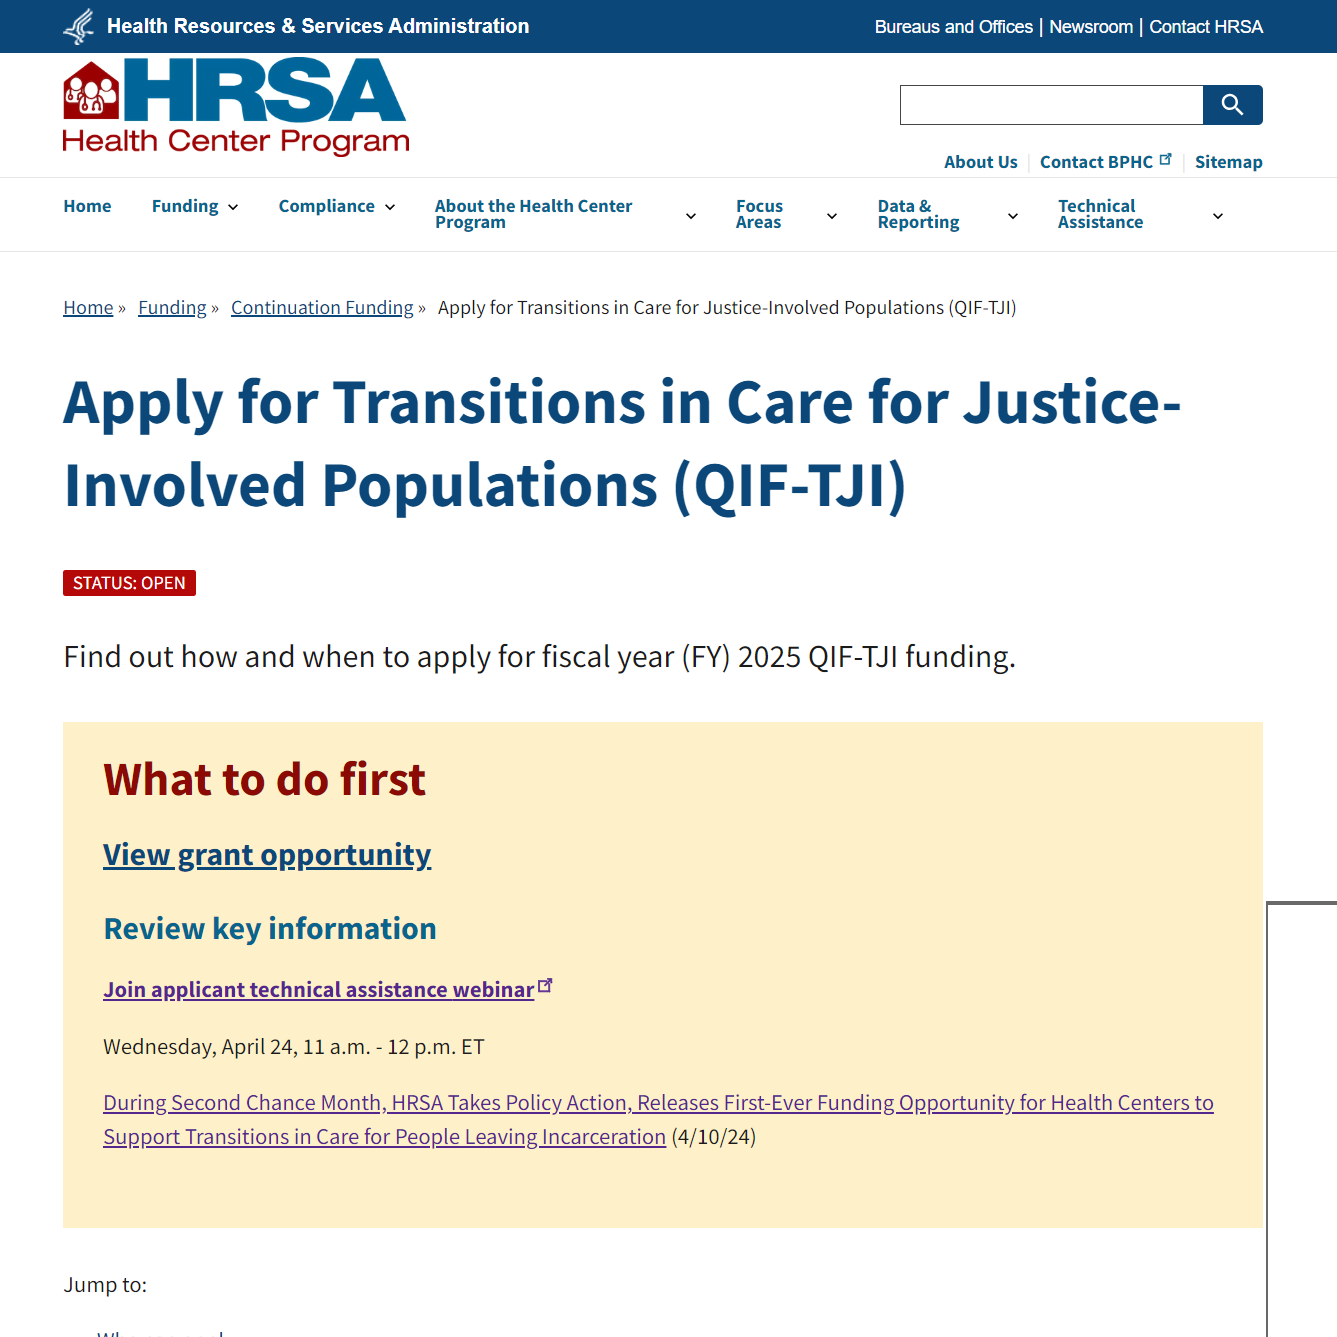 Apply for Transitions in Care for Justice-Involved Populations (QIF-TJI)